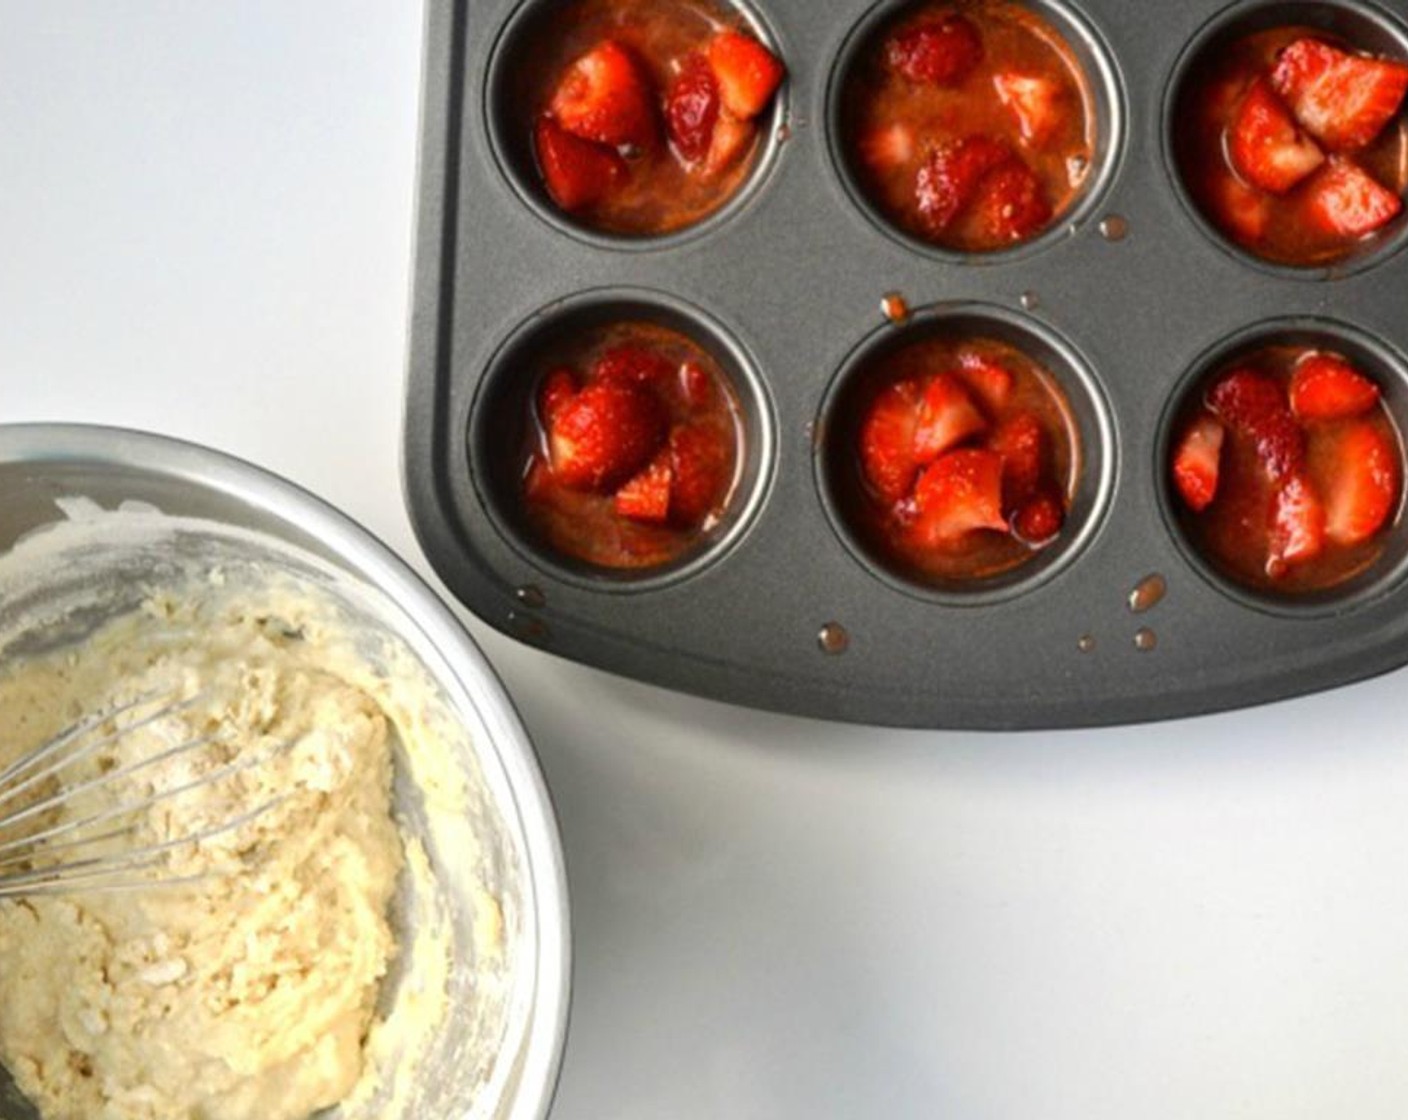 step 4 In a muffin tin, fill each section up 3/4 of the way with equal amounts of strawberries and liquid, about 2 tablespoons per muffin compartment.